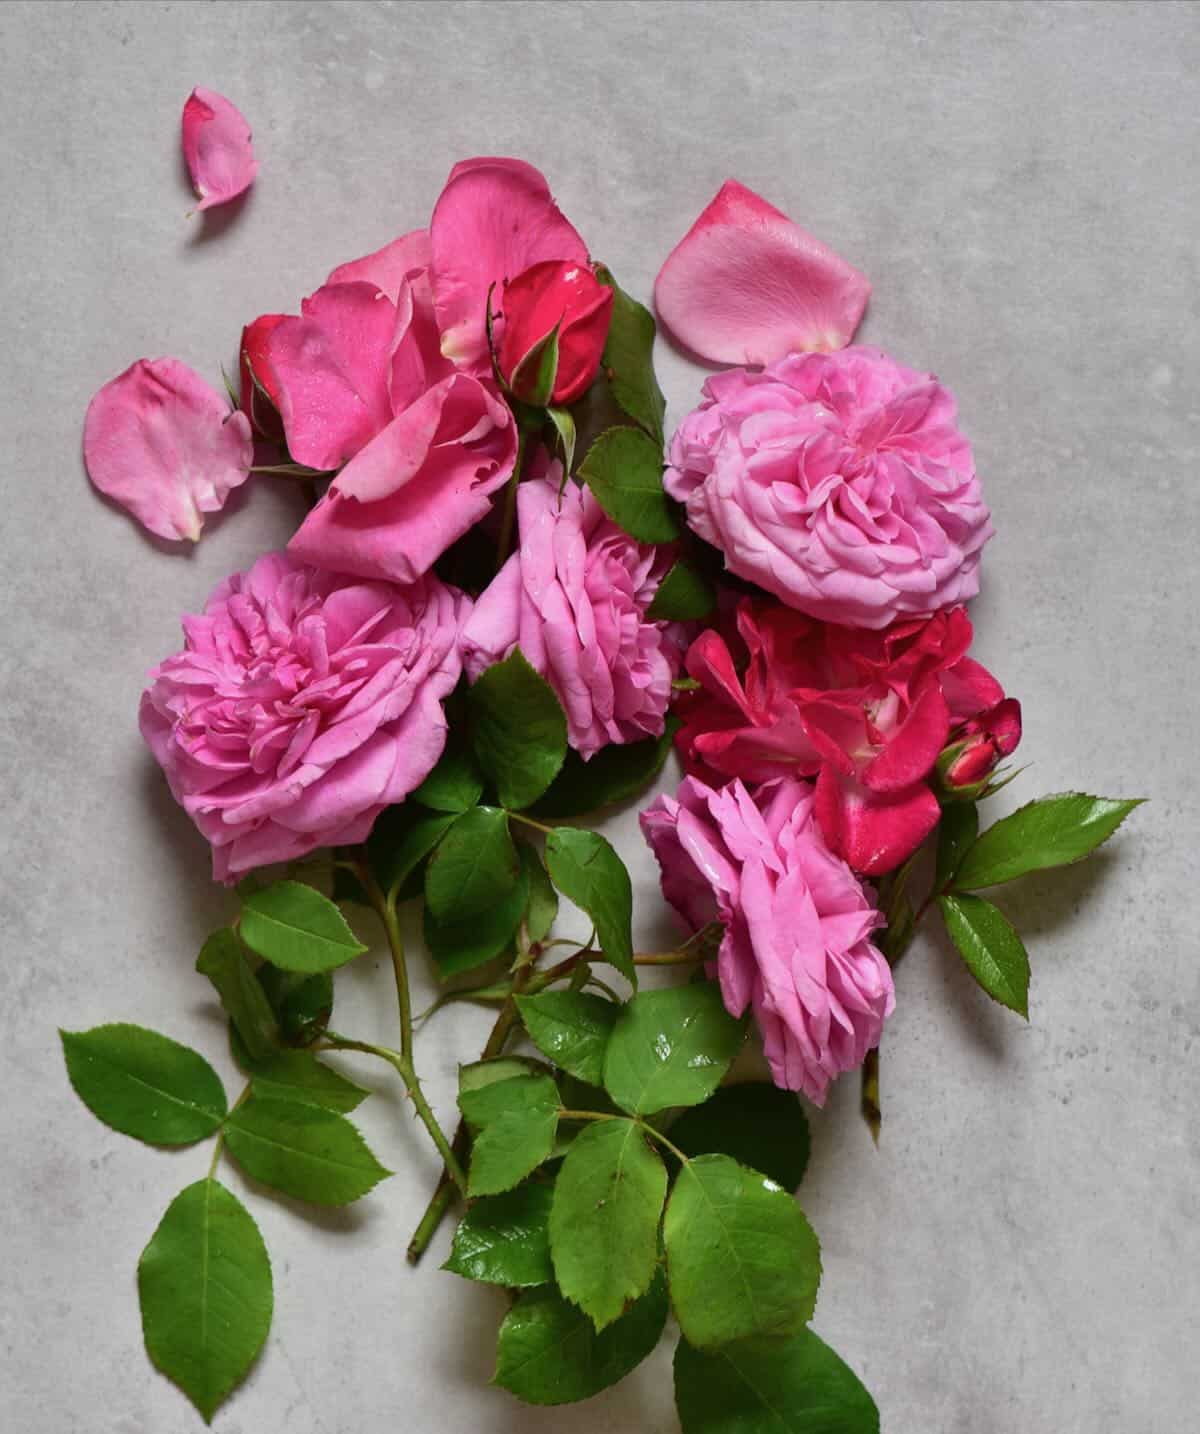 blossoms of fragrant organic roses